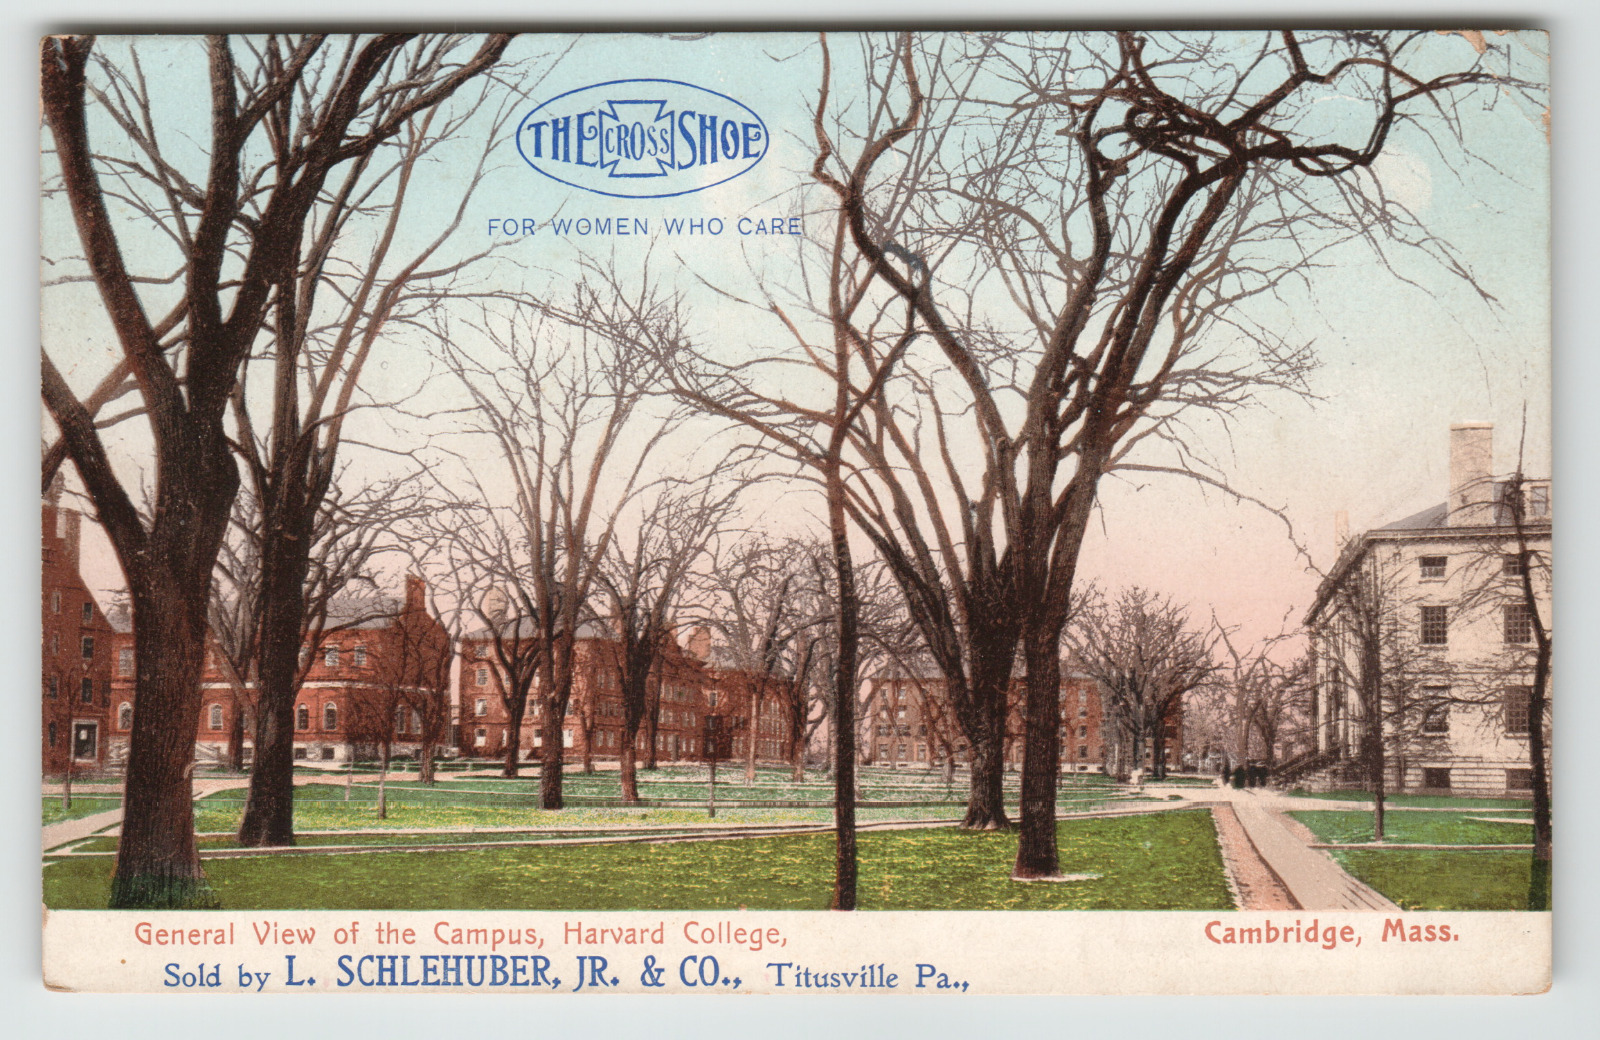 Postcard Advertising L. Schlehuber Jr. Shoes in Titusville, PA Cross Shoes